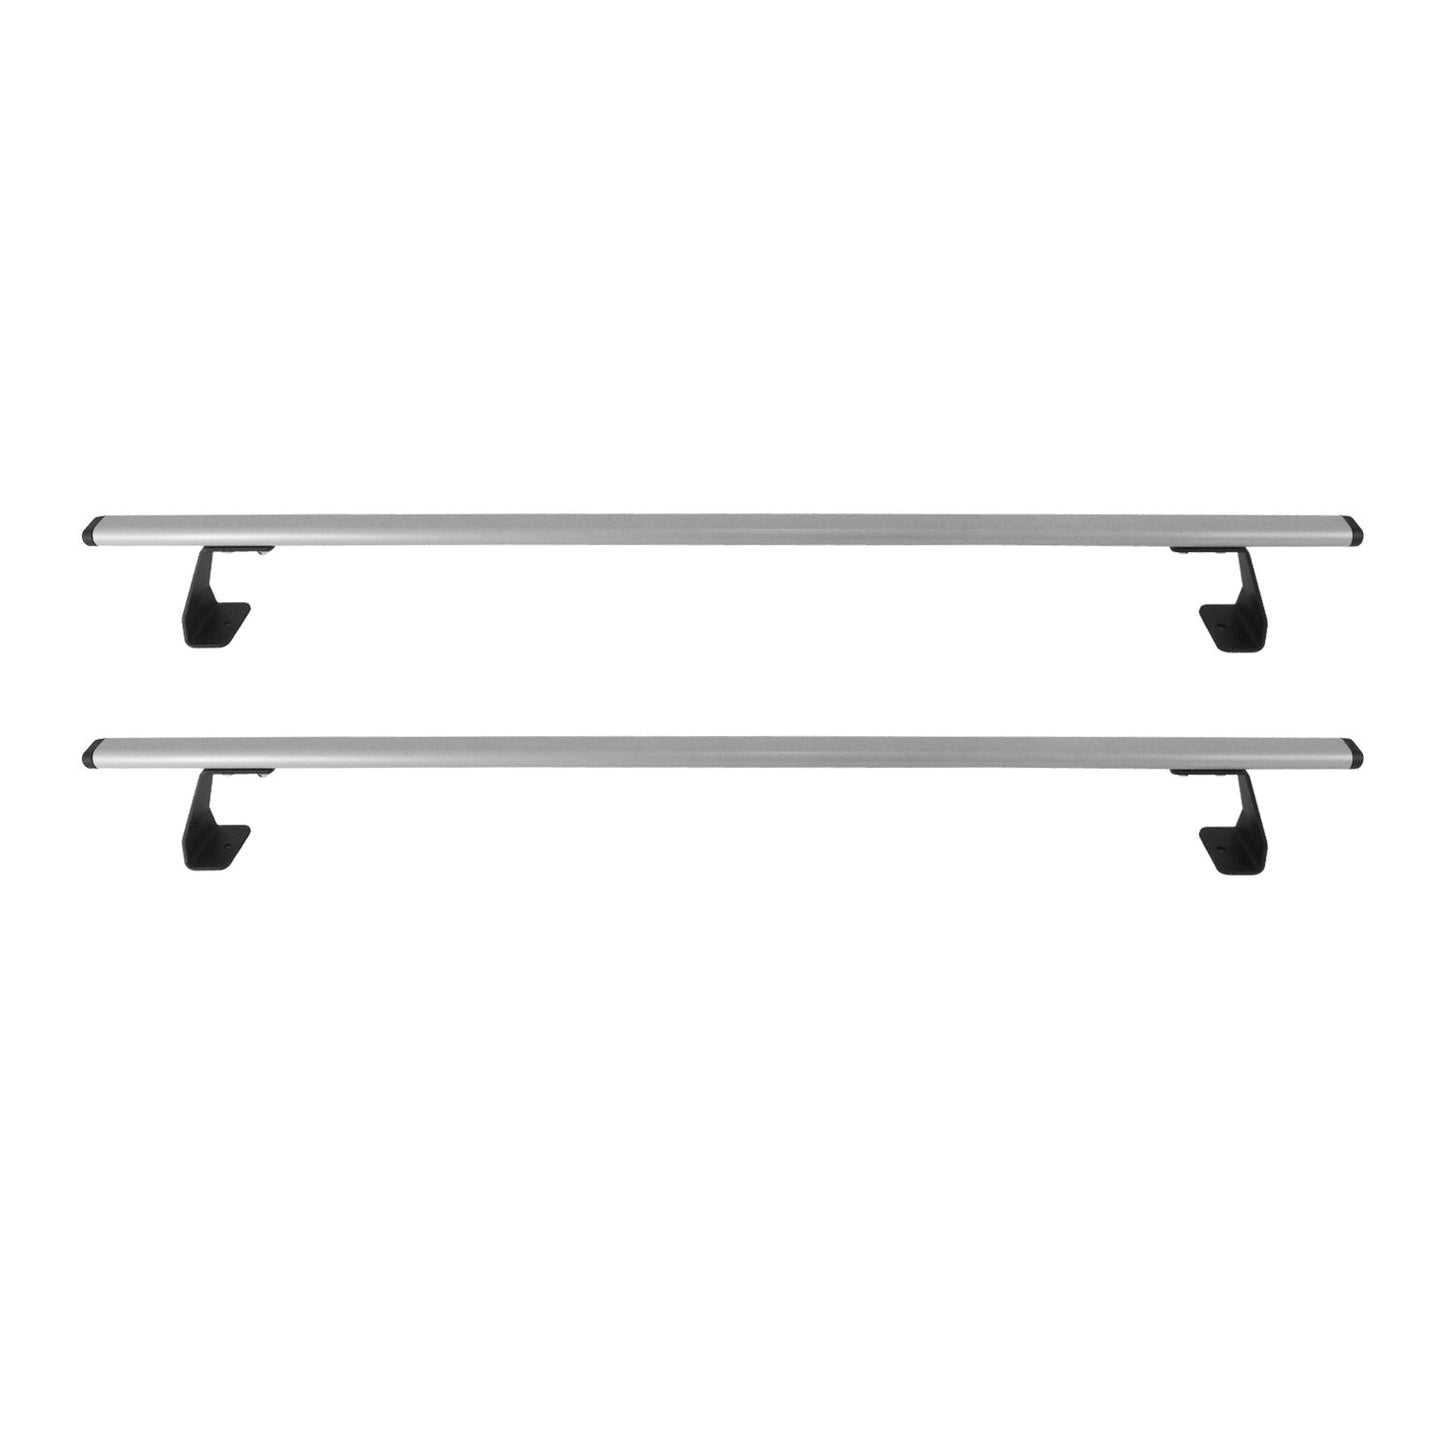 OMAC Trunk Bed Carrier Roof Racks Cross Bars for VW Caddy 2021-2024 Metal Silver 2Pcs 7566910-2